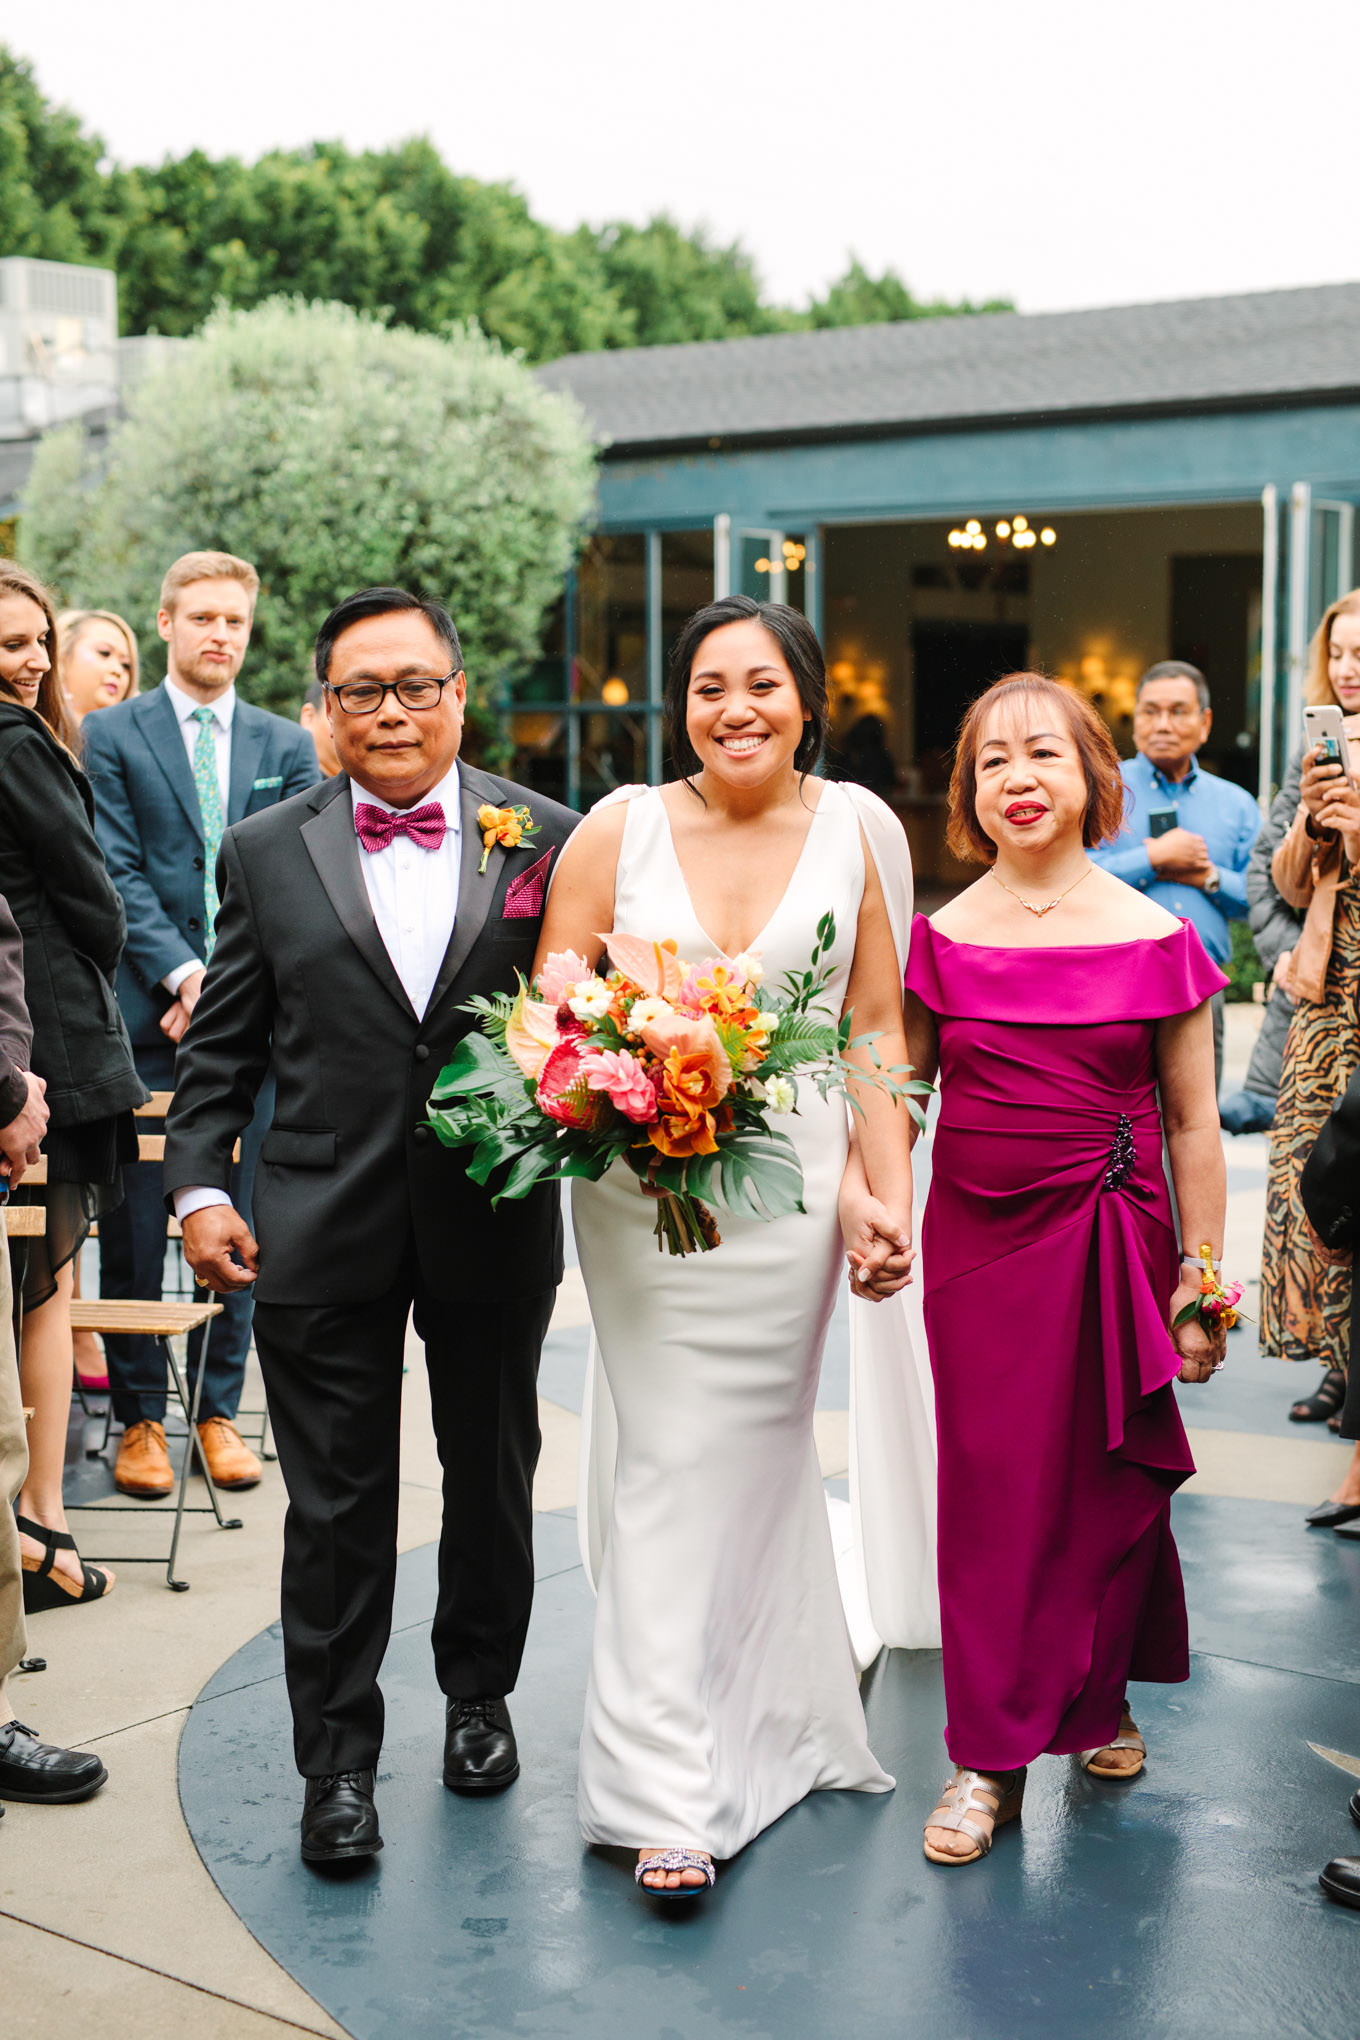 Bride walking down the aisle | TV inspired wedding at The Fig House Los Angeles | Published on The Knot | Fresh and colorful photography for fun-loving couples in Southern California | #losangeleswedding #TVwedding #colorfulwedding #theknot   Source: Mary Costa Photography | Los Angeles wedding photographer